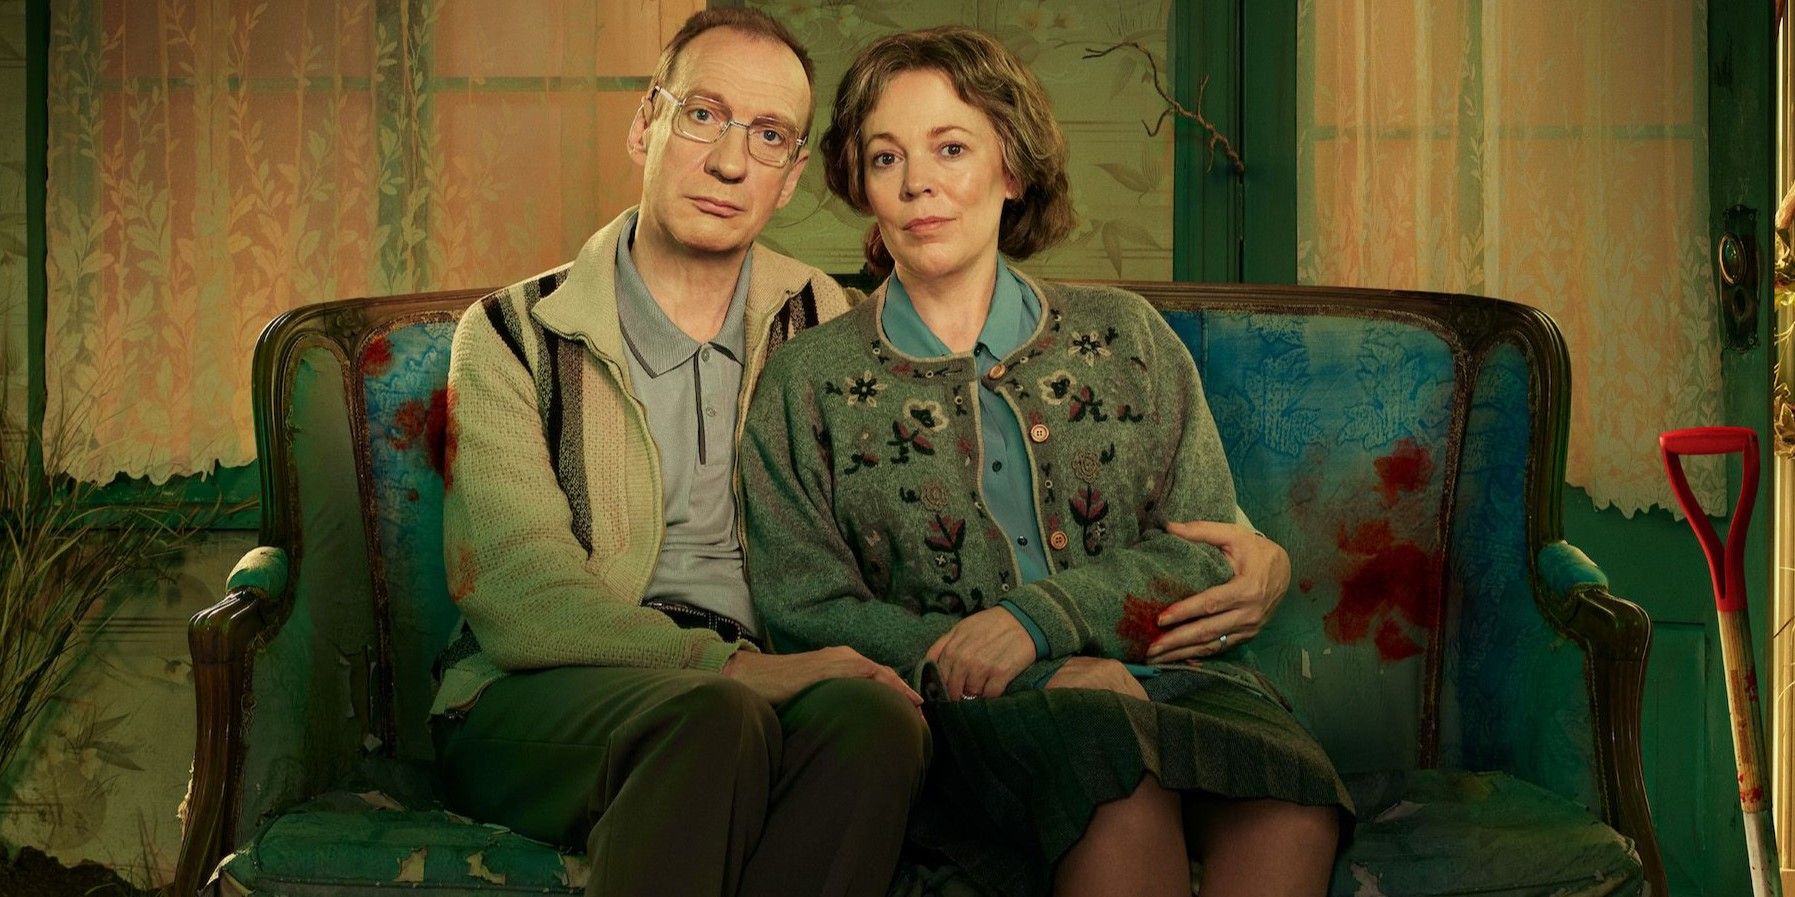 David Thewlis and Olivia Colman in 'Landscapers' poster.